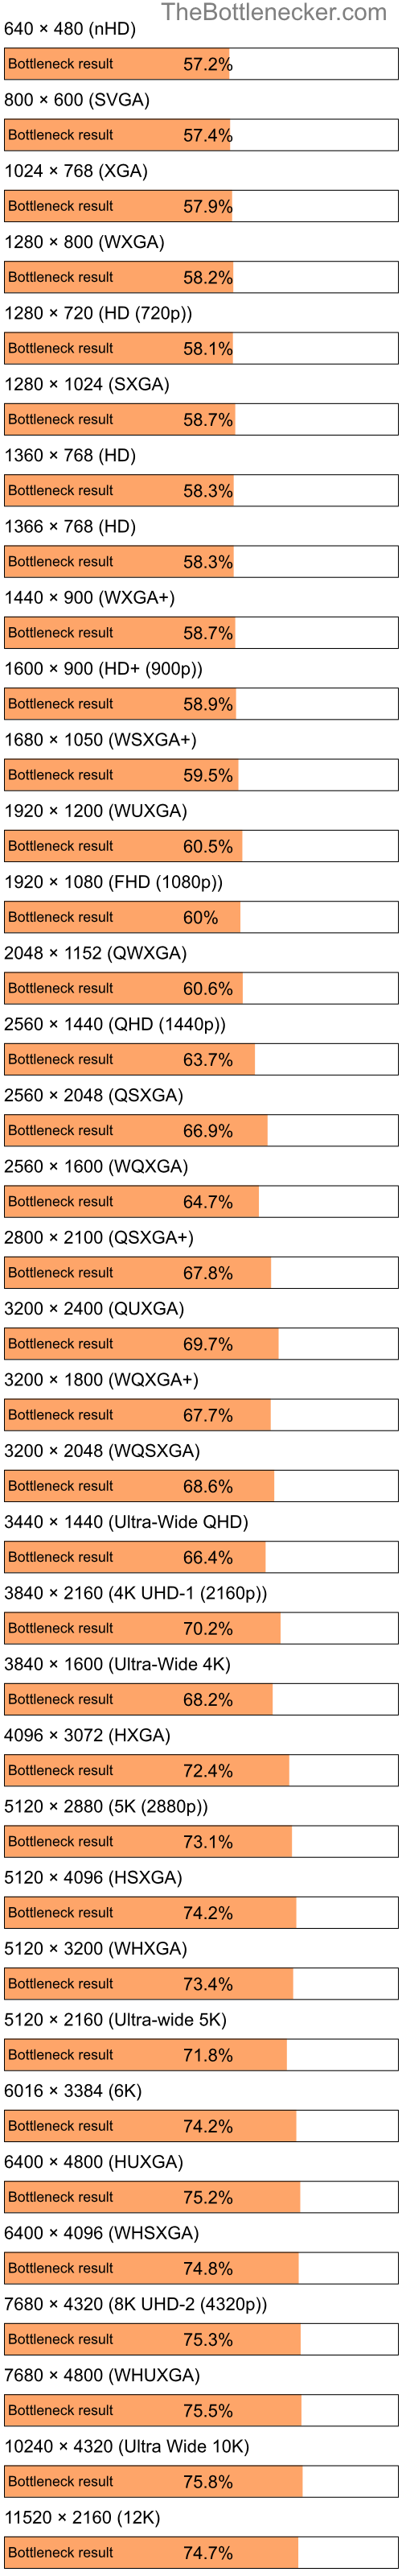 Bottleneck results by resolution for Intel Pentium 4 and NVIDIA GeForce 8400M GT in Processor Intense Tasks